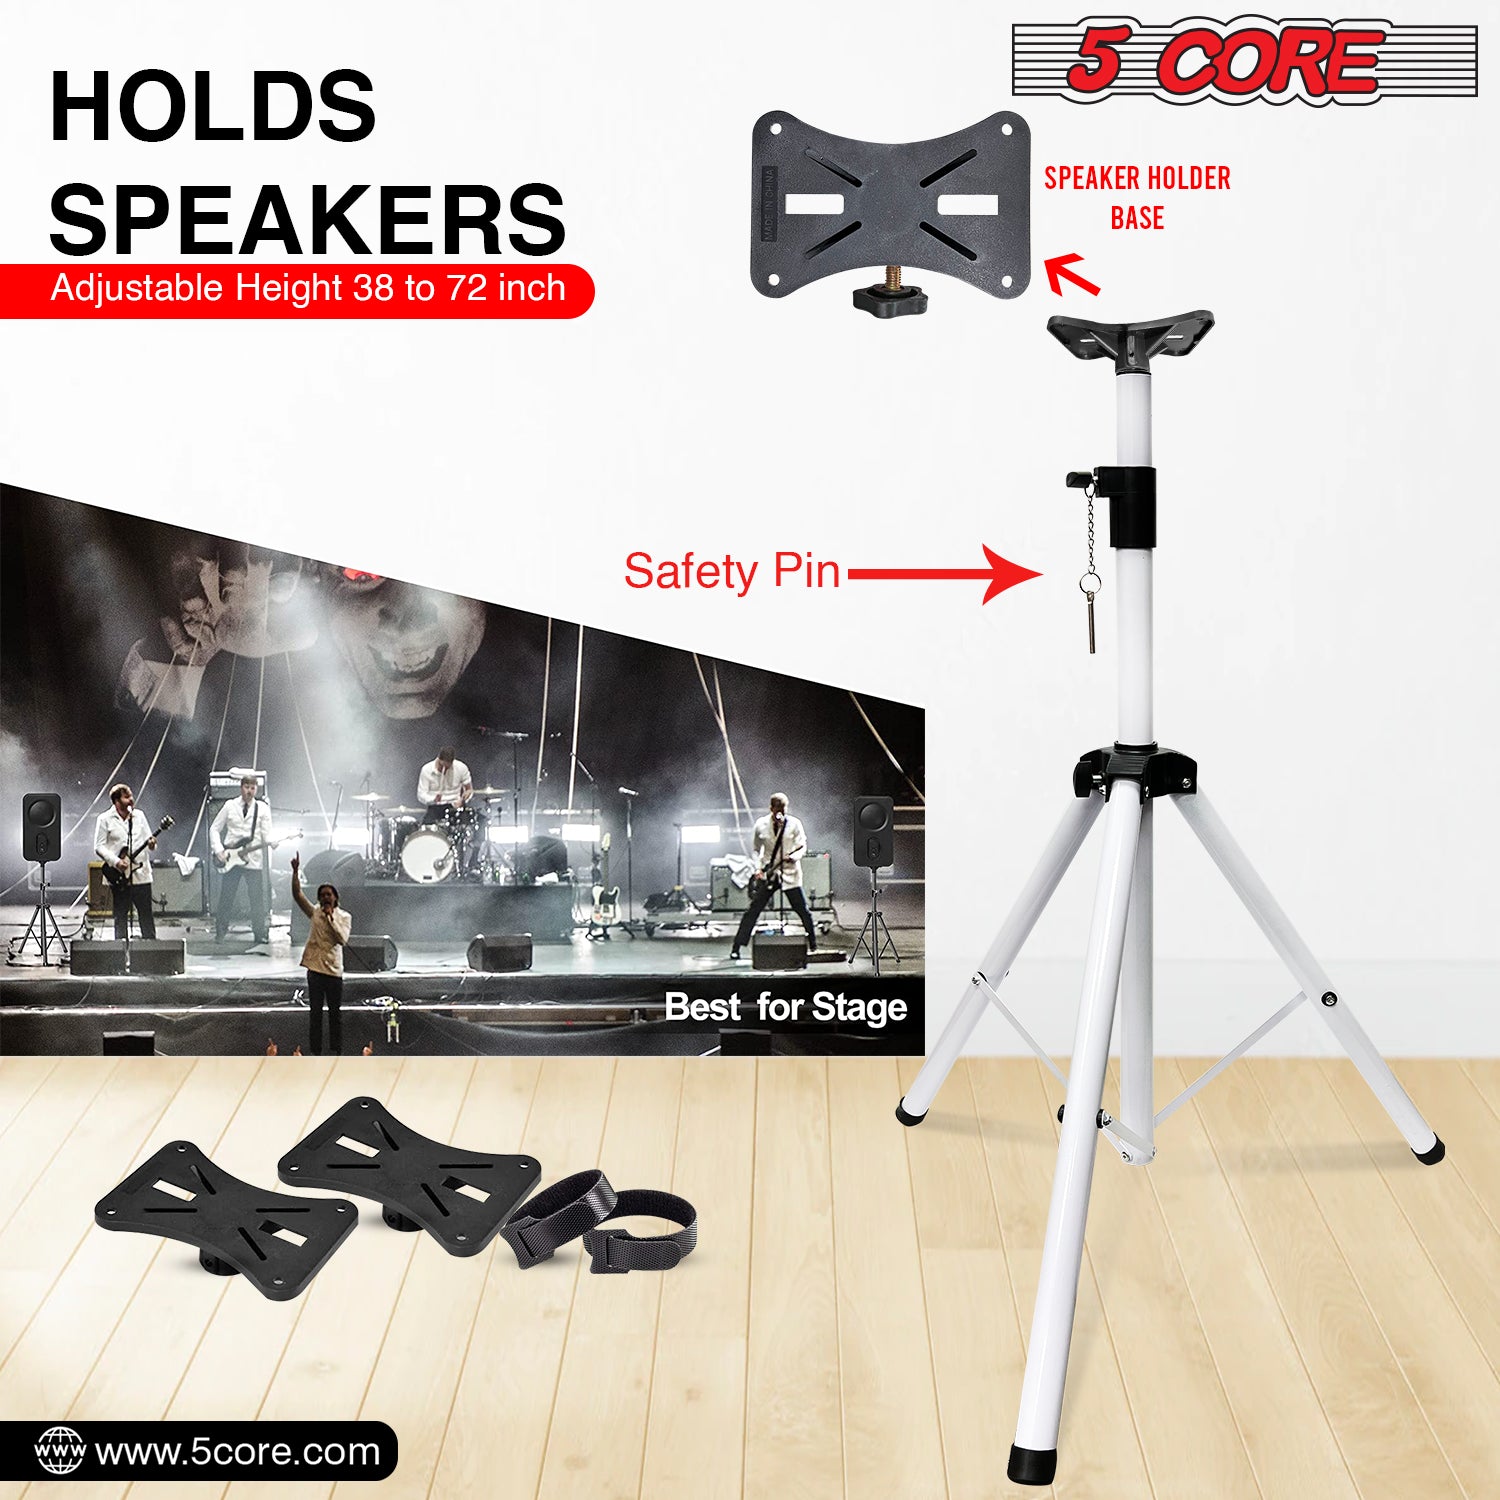 5 Core speaker Stand 2 Pieces Subwoofer Stands White Height Adjustable Light Weight Studio PA Speaker Holder for Large Speakers w Locking Safety PIN and 35mm Compatible Insert On Stage In Studio Use - SS ECO 2PK WH WoB